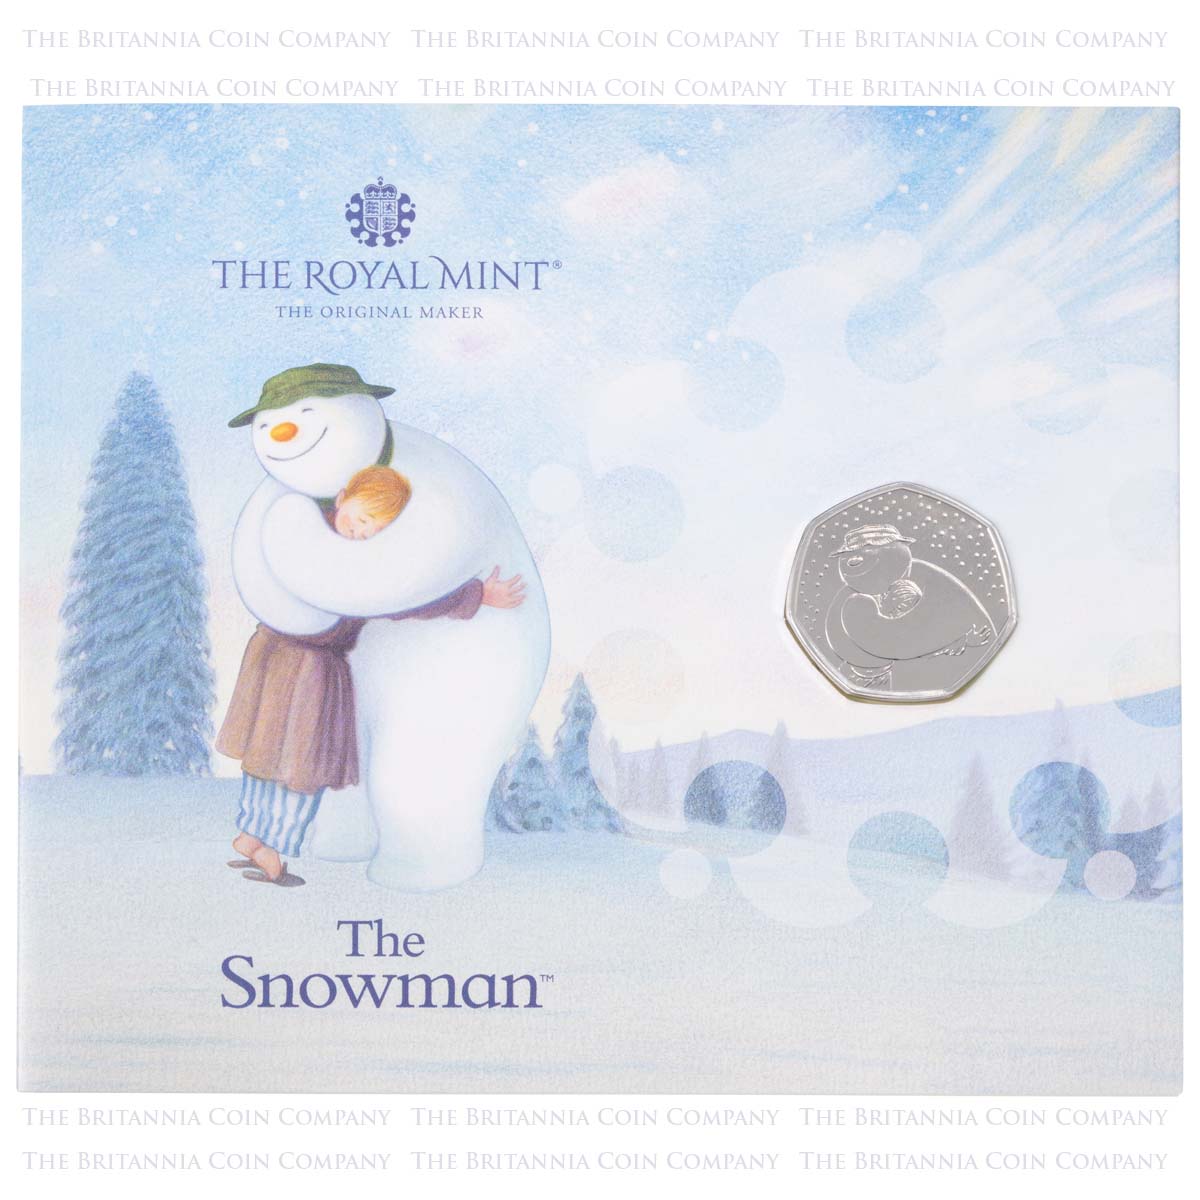 Uk20SMBU 2020 The Snowman Fifty Pence Brilliant Uncirculated Coin In Folder Packaging